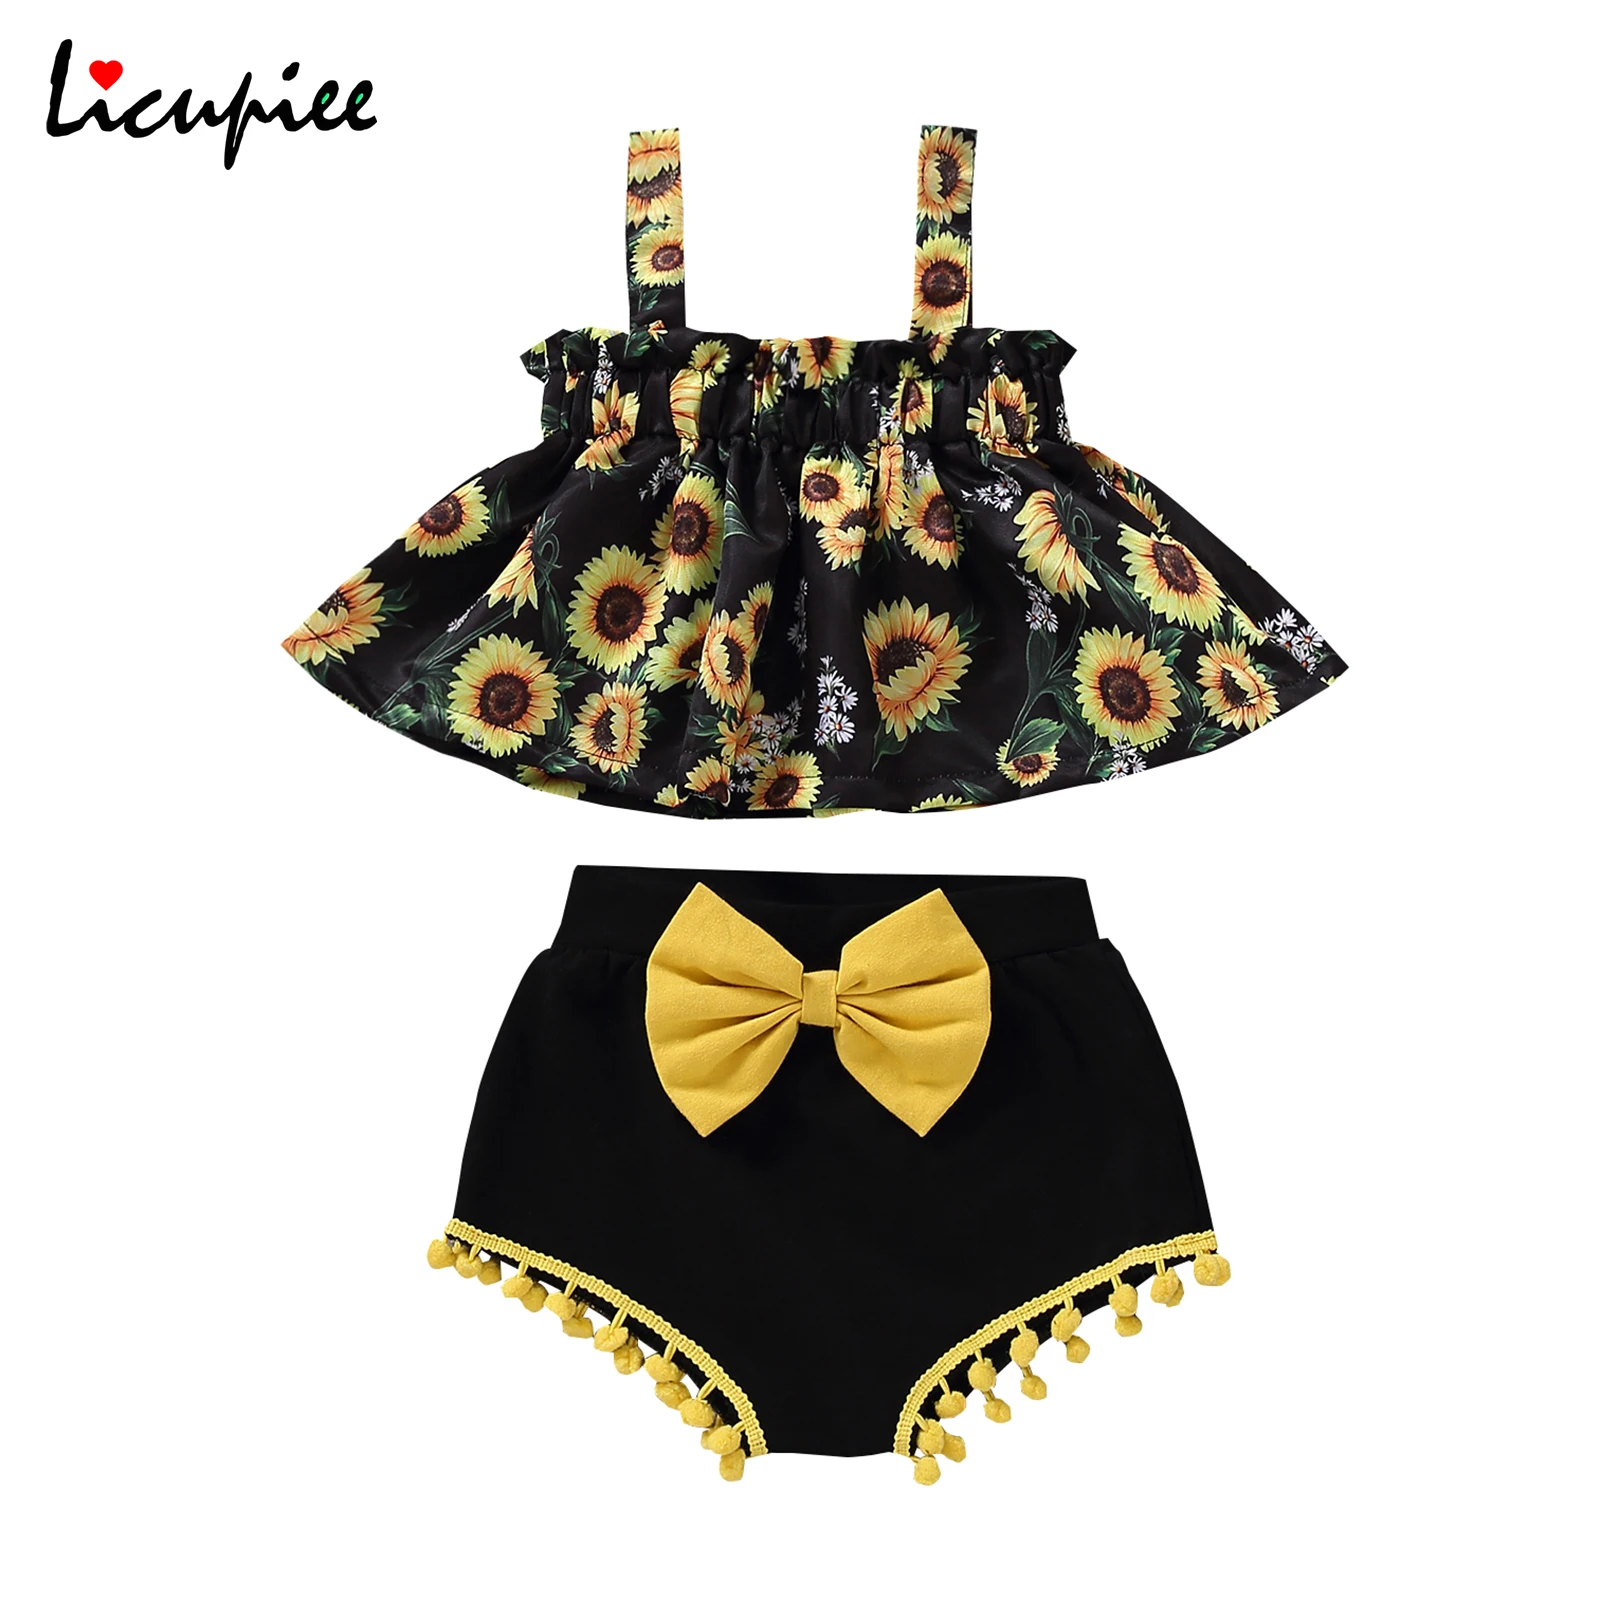 

0-12 Months Girl\u2019s 2pcs Summer Clothes Set, Sunflower Printed Suspender Skirt Hem Tops with Bow Decoration Triangle Shorts